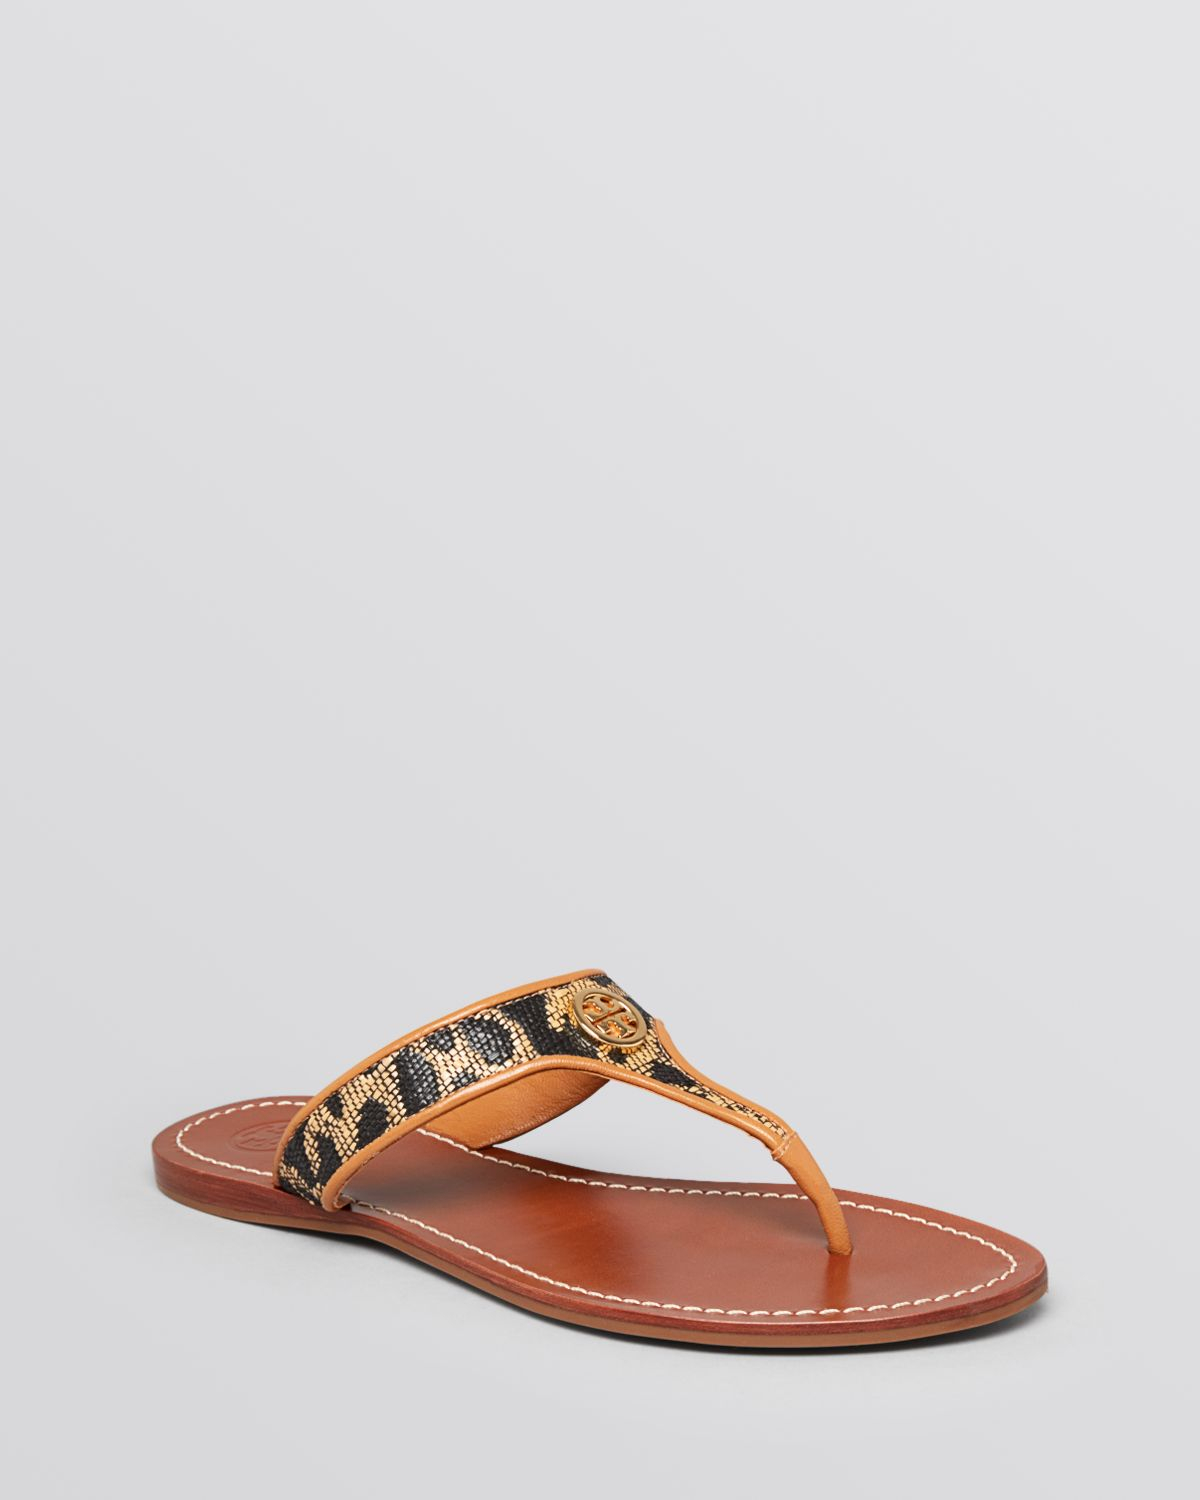 Tory Burch Flat Thong Sandals Cameron in Animal (NaturalTan Leopard ...